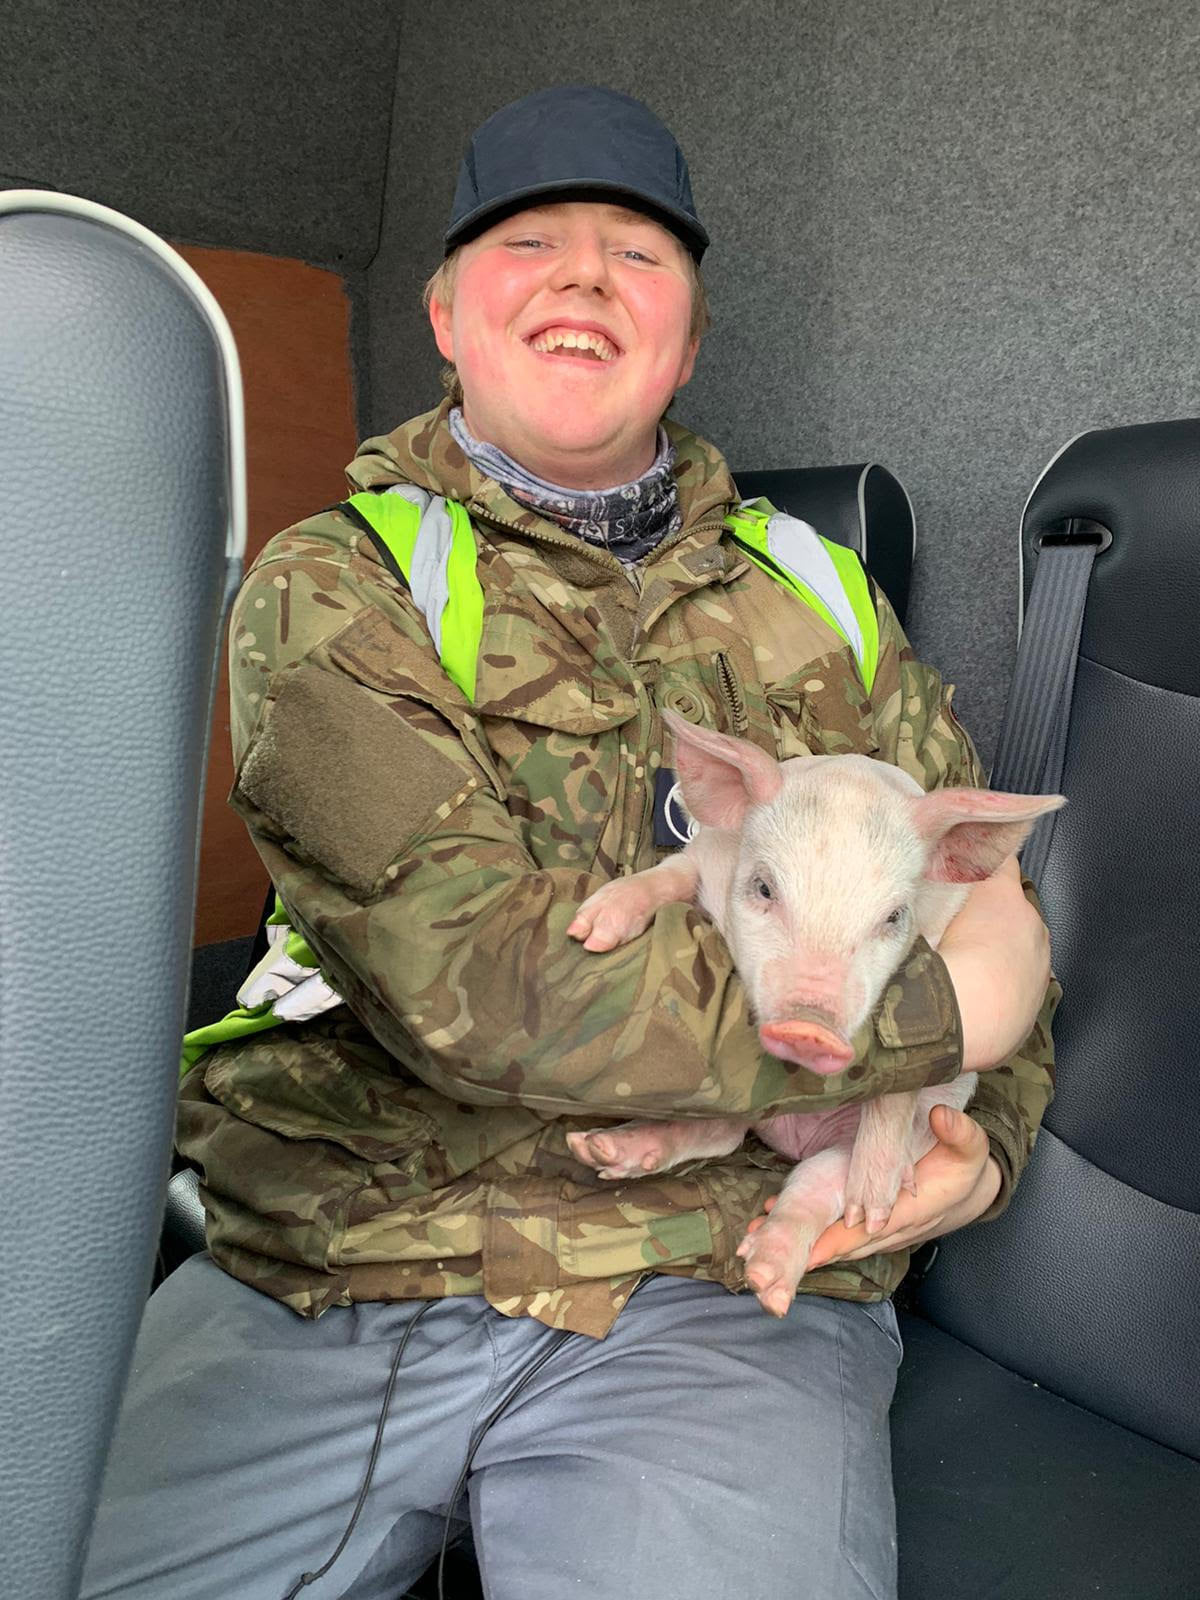 Engineer SAC(T) George French rescued the pig from the runway where he had tried to join pilots (RAF Lossiemouth/Facebook)